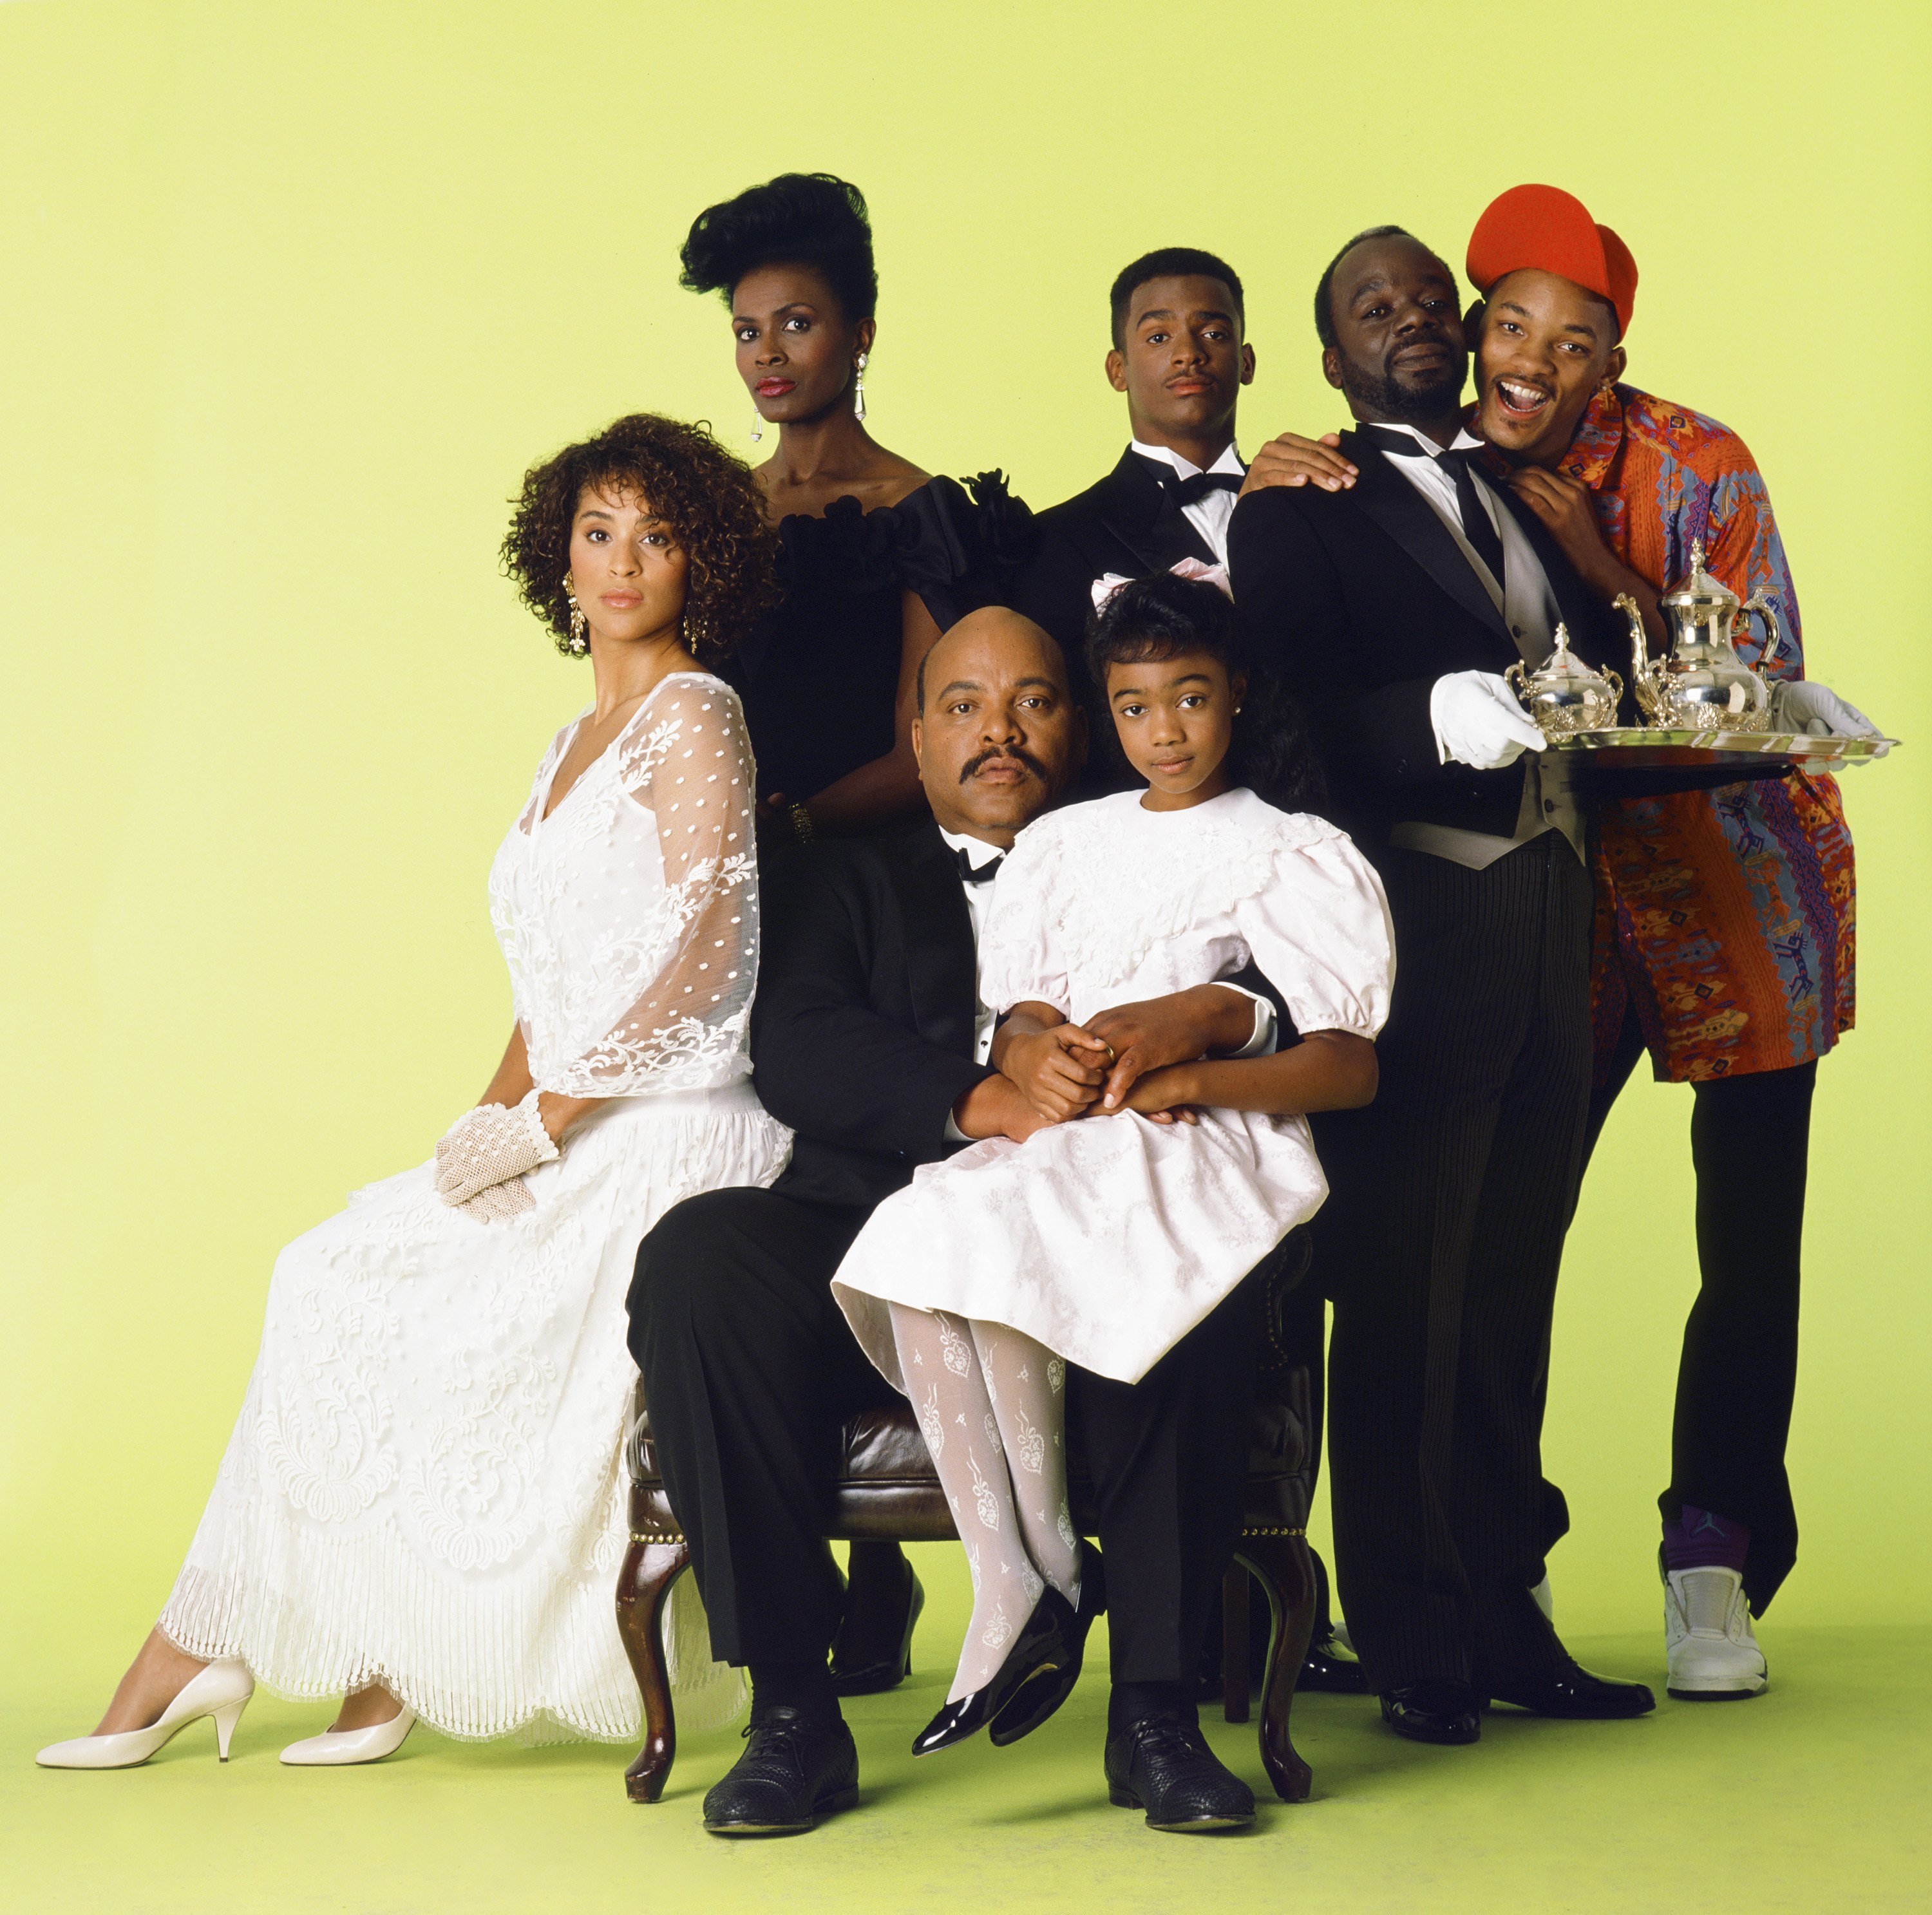 Karyn Parsons, Janet Hubert, James Avery, Tatyana Ali, Alfonso Ribeiro, Joseph Marcell, and Will Smith on the set of "Fresh Prince of Bel-Air" on August 15, 1992 | Photo: Getty Images